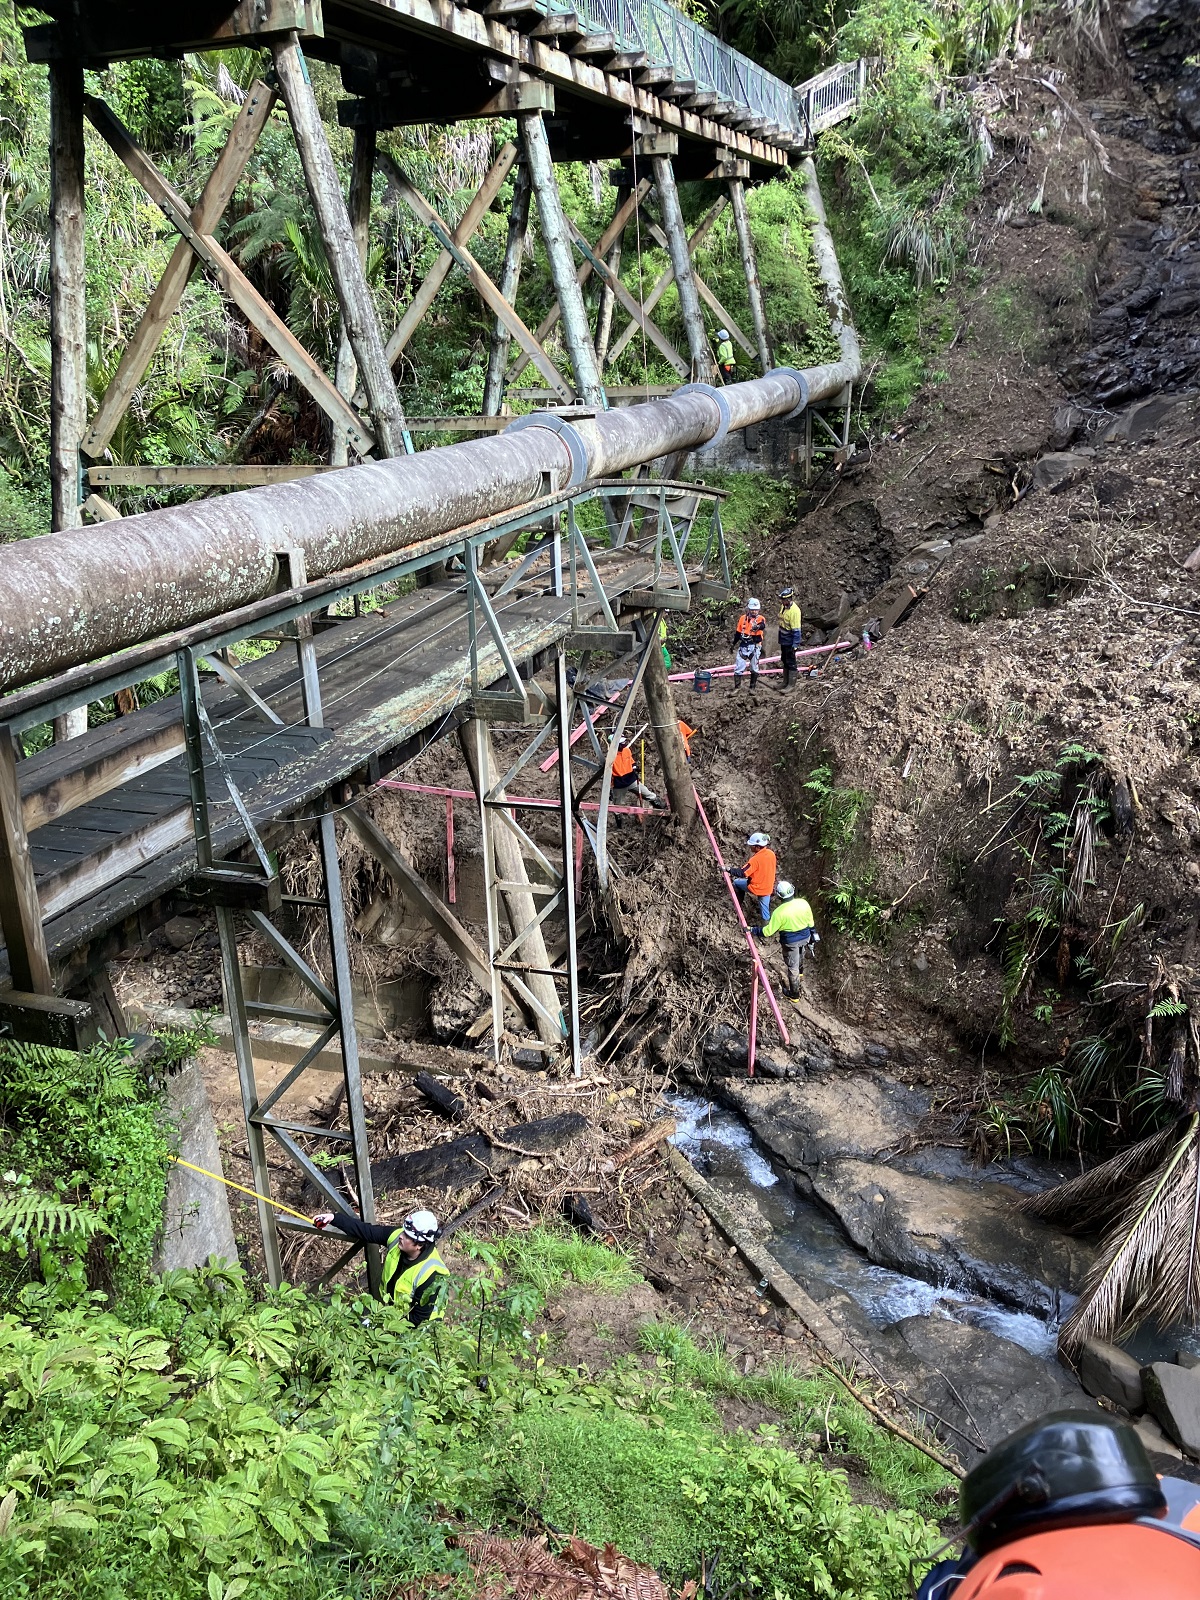 Quinn’s Bridge is one of several sites Watercare is working on to get the Upper Nihotupu Dam back in service.